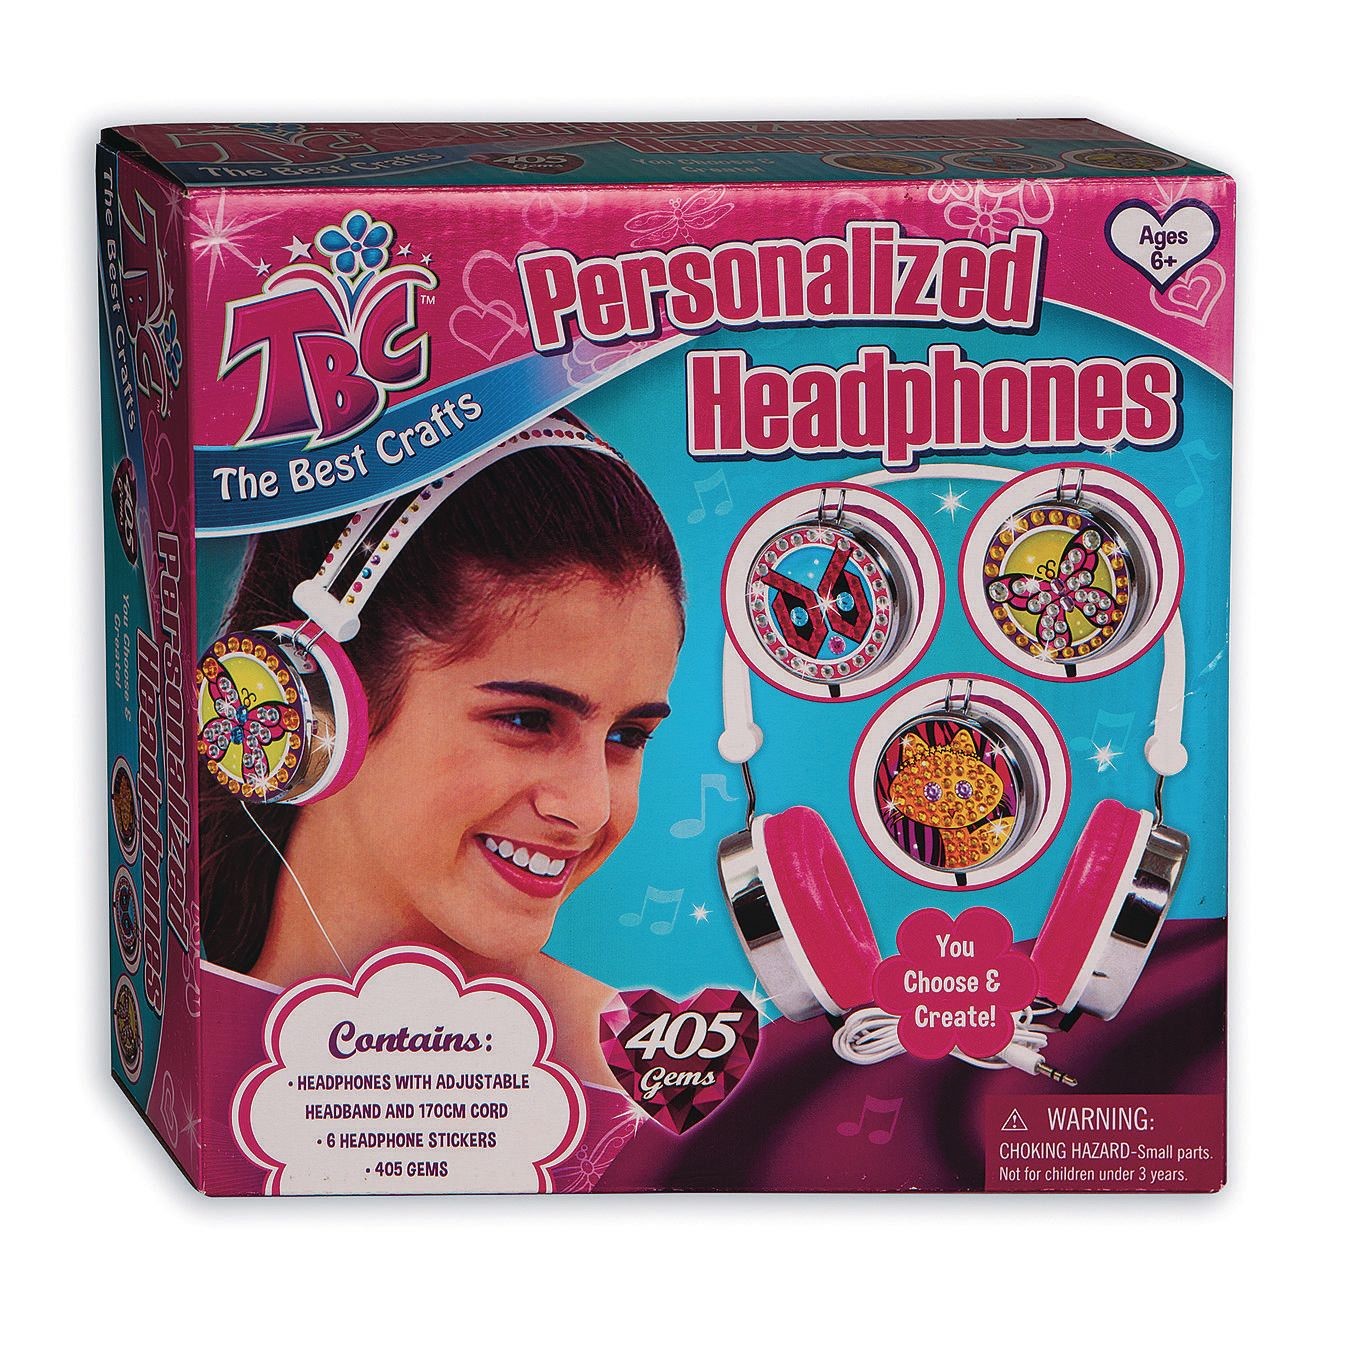 Buy Personalized Headphones Craft Kit at S&S Worldwide